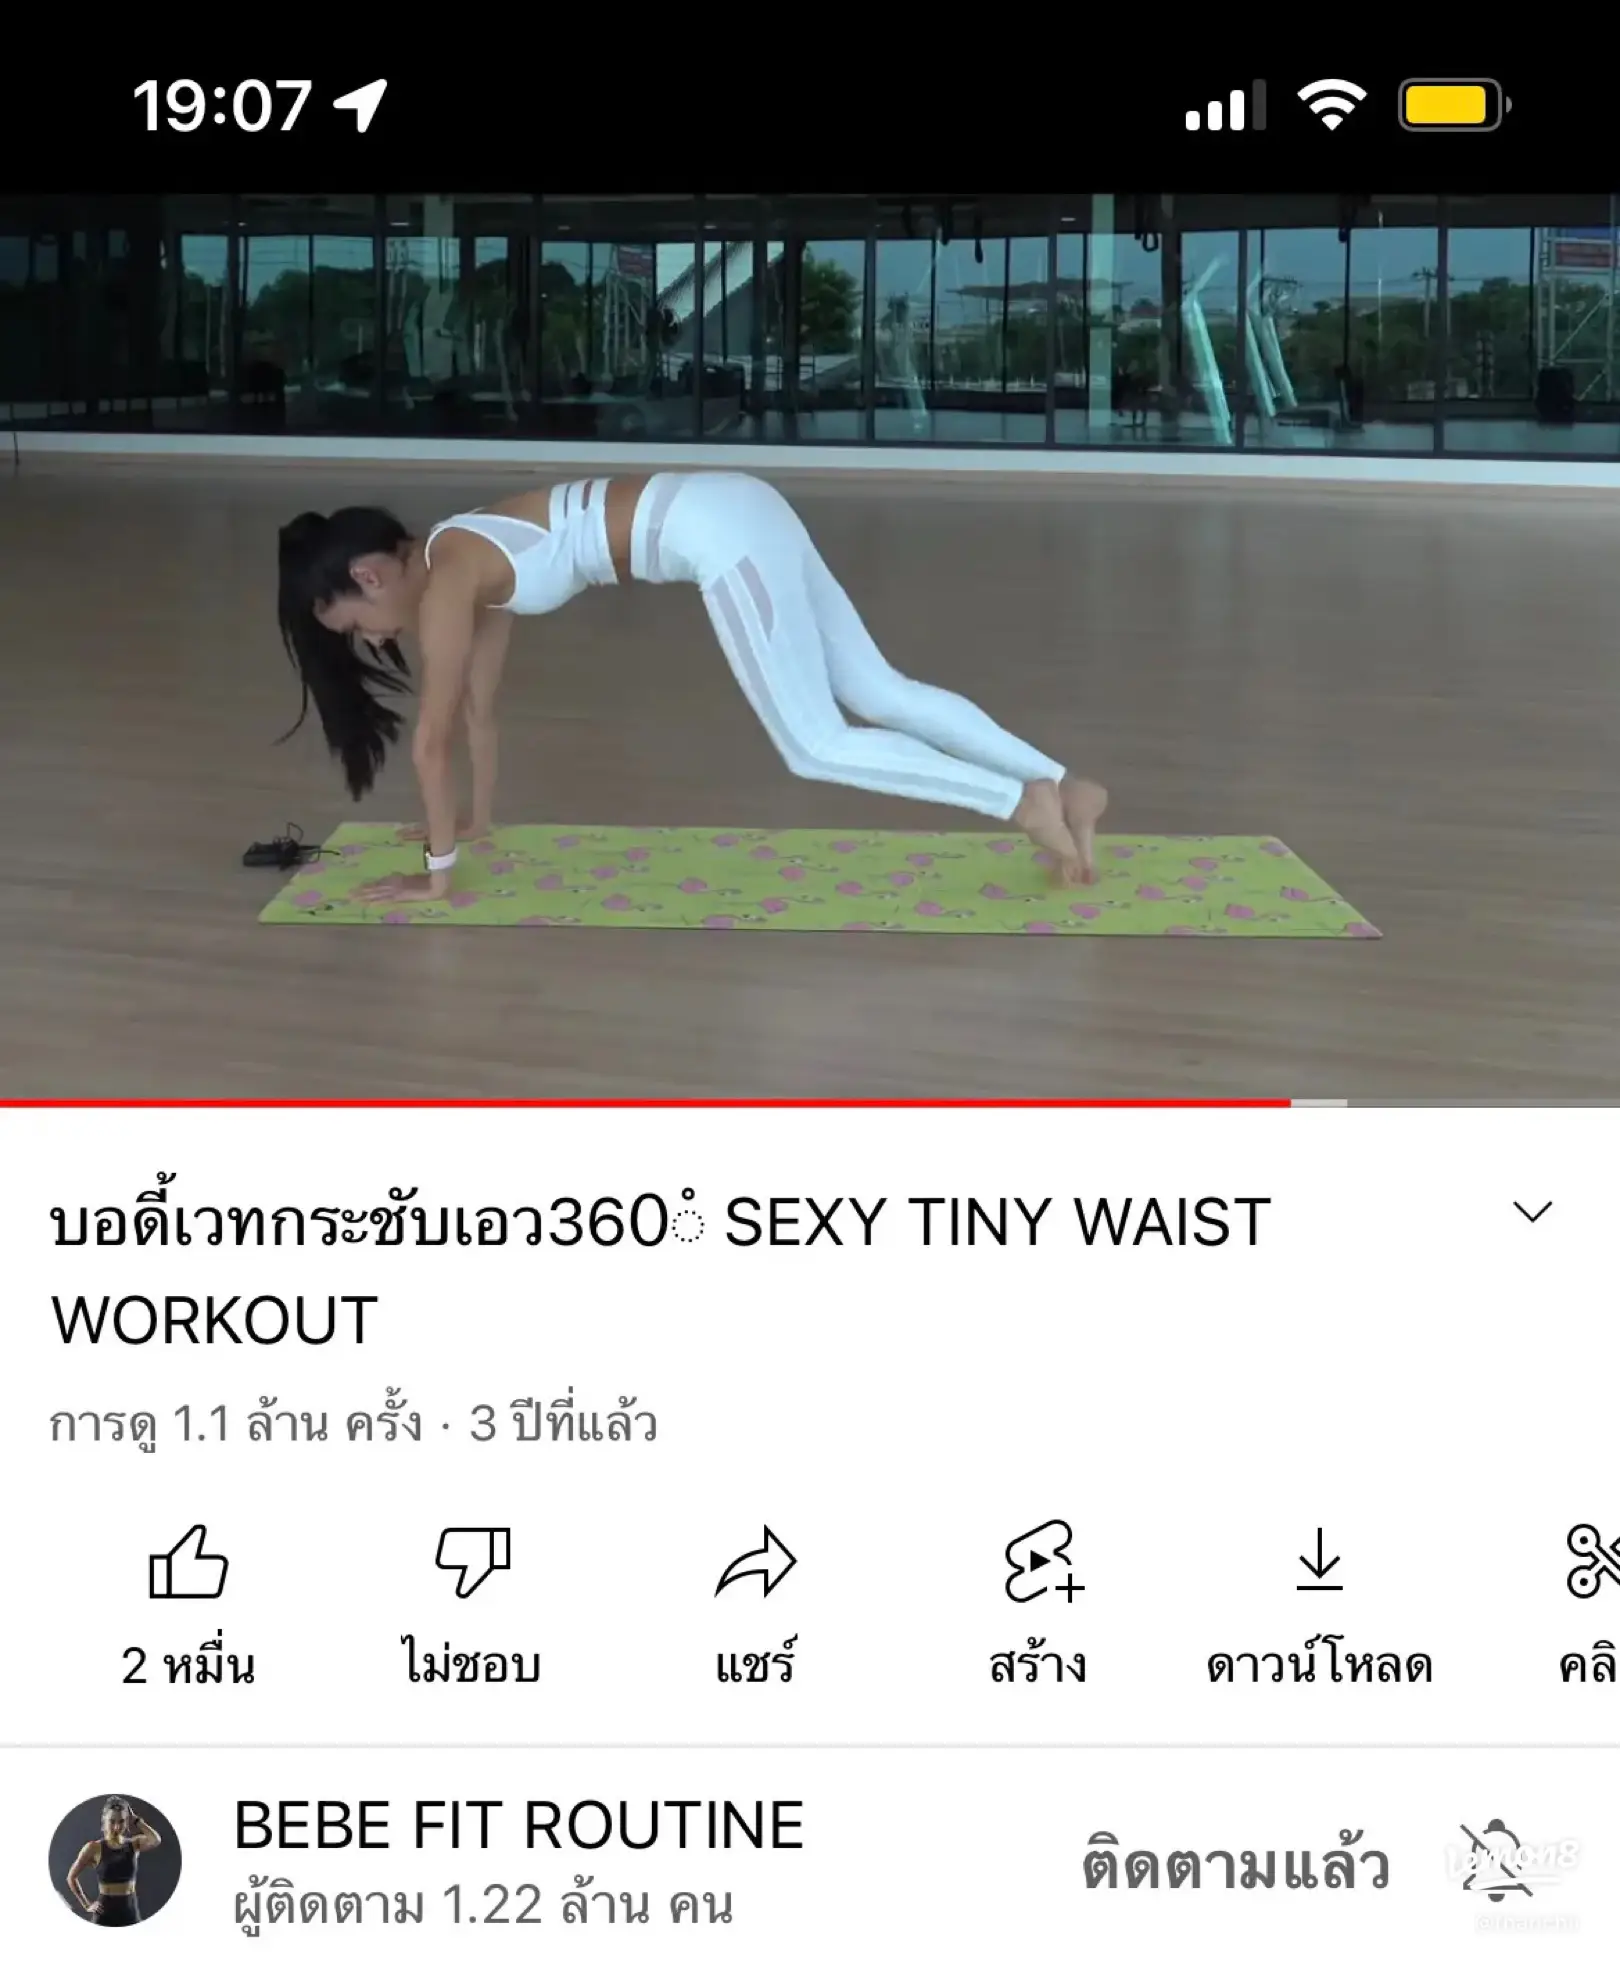 How To Waist S 🏋️‍♀️, Gallery posted by _Kongsurachai